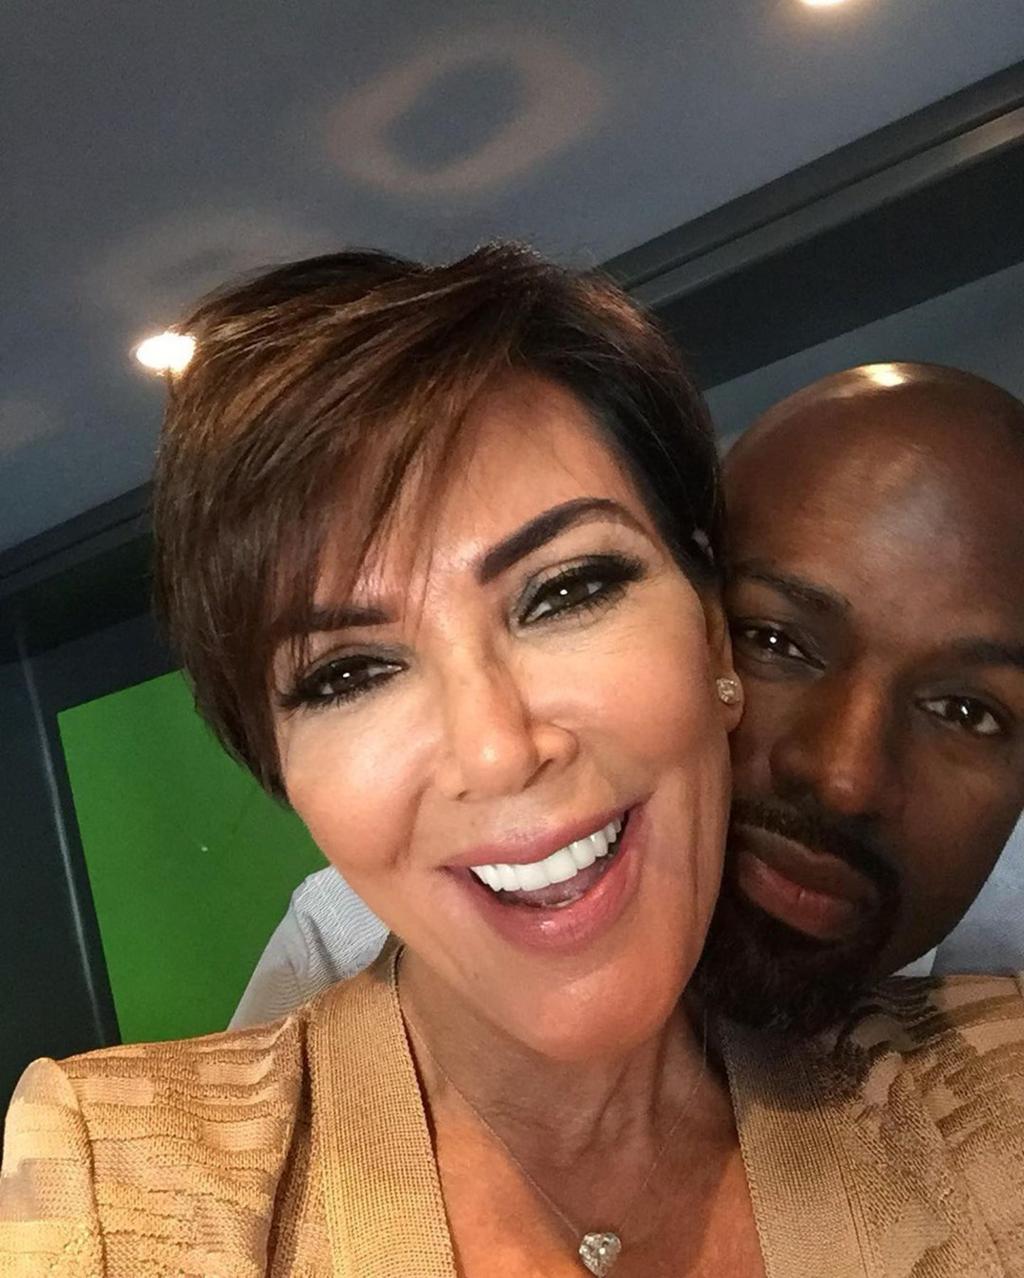 Kris Jenner sparks engagement reports in wake of $1.2 million jewel ring